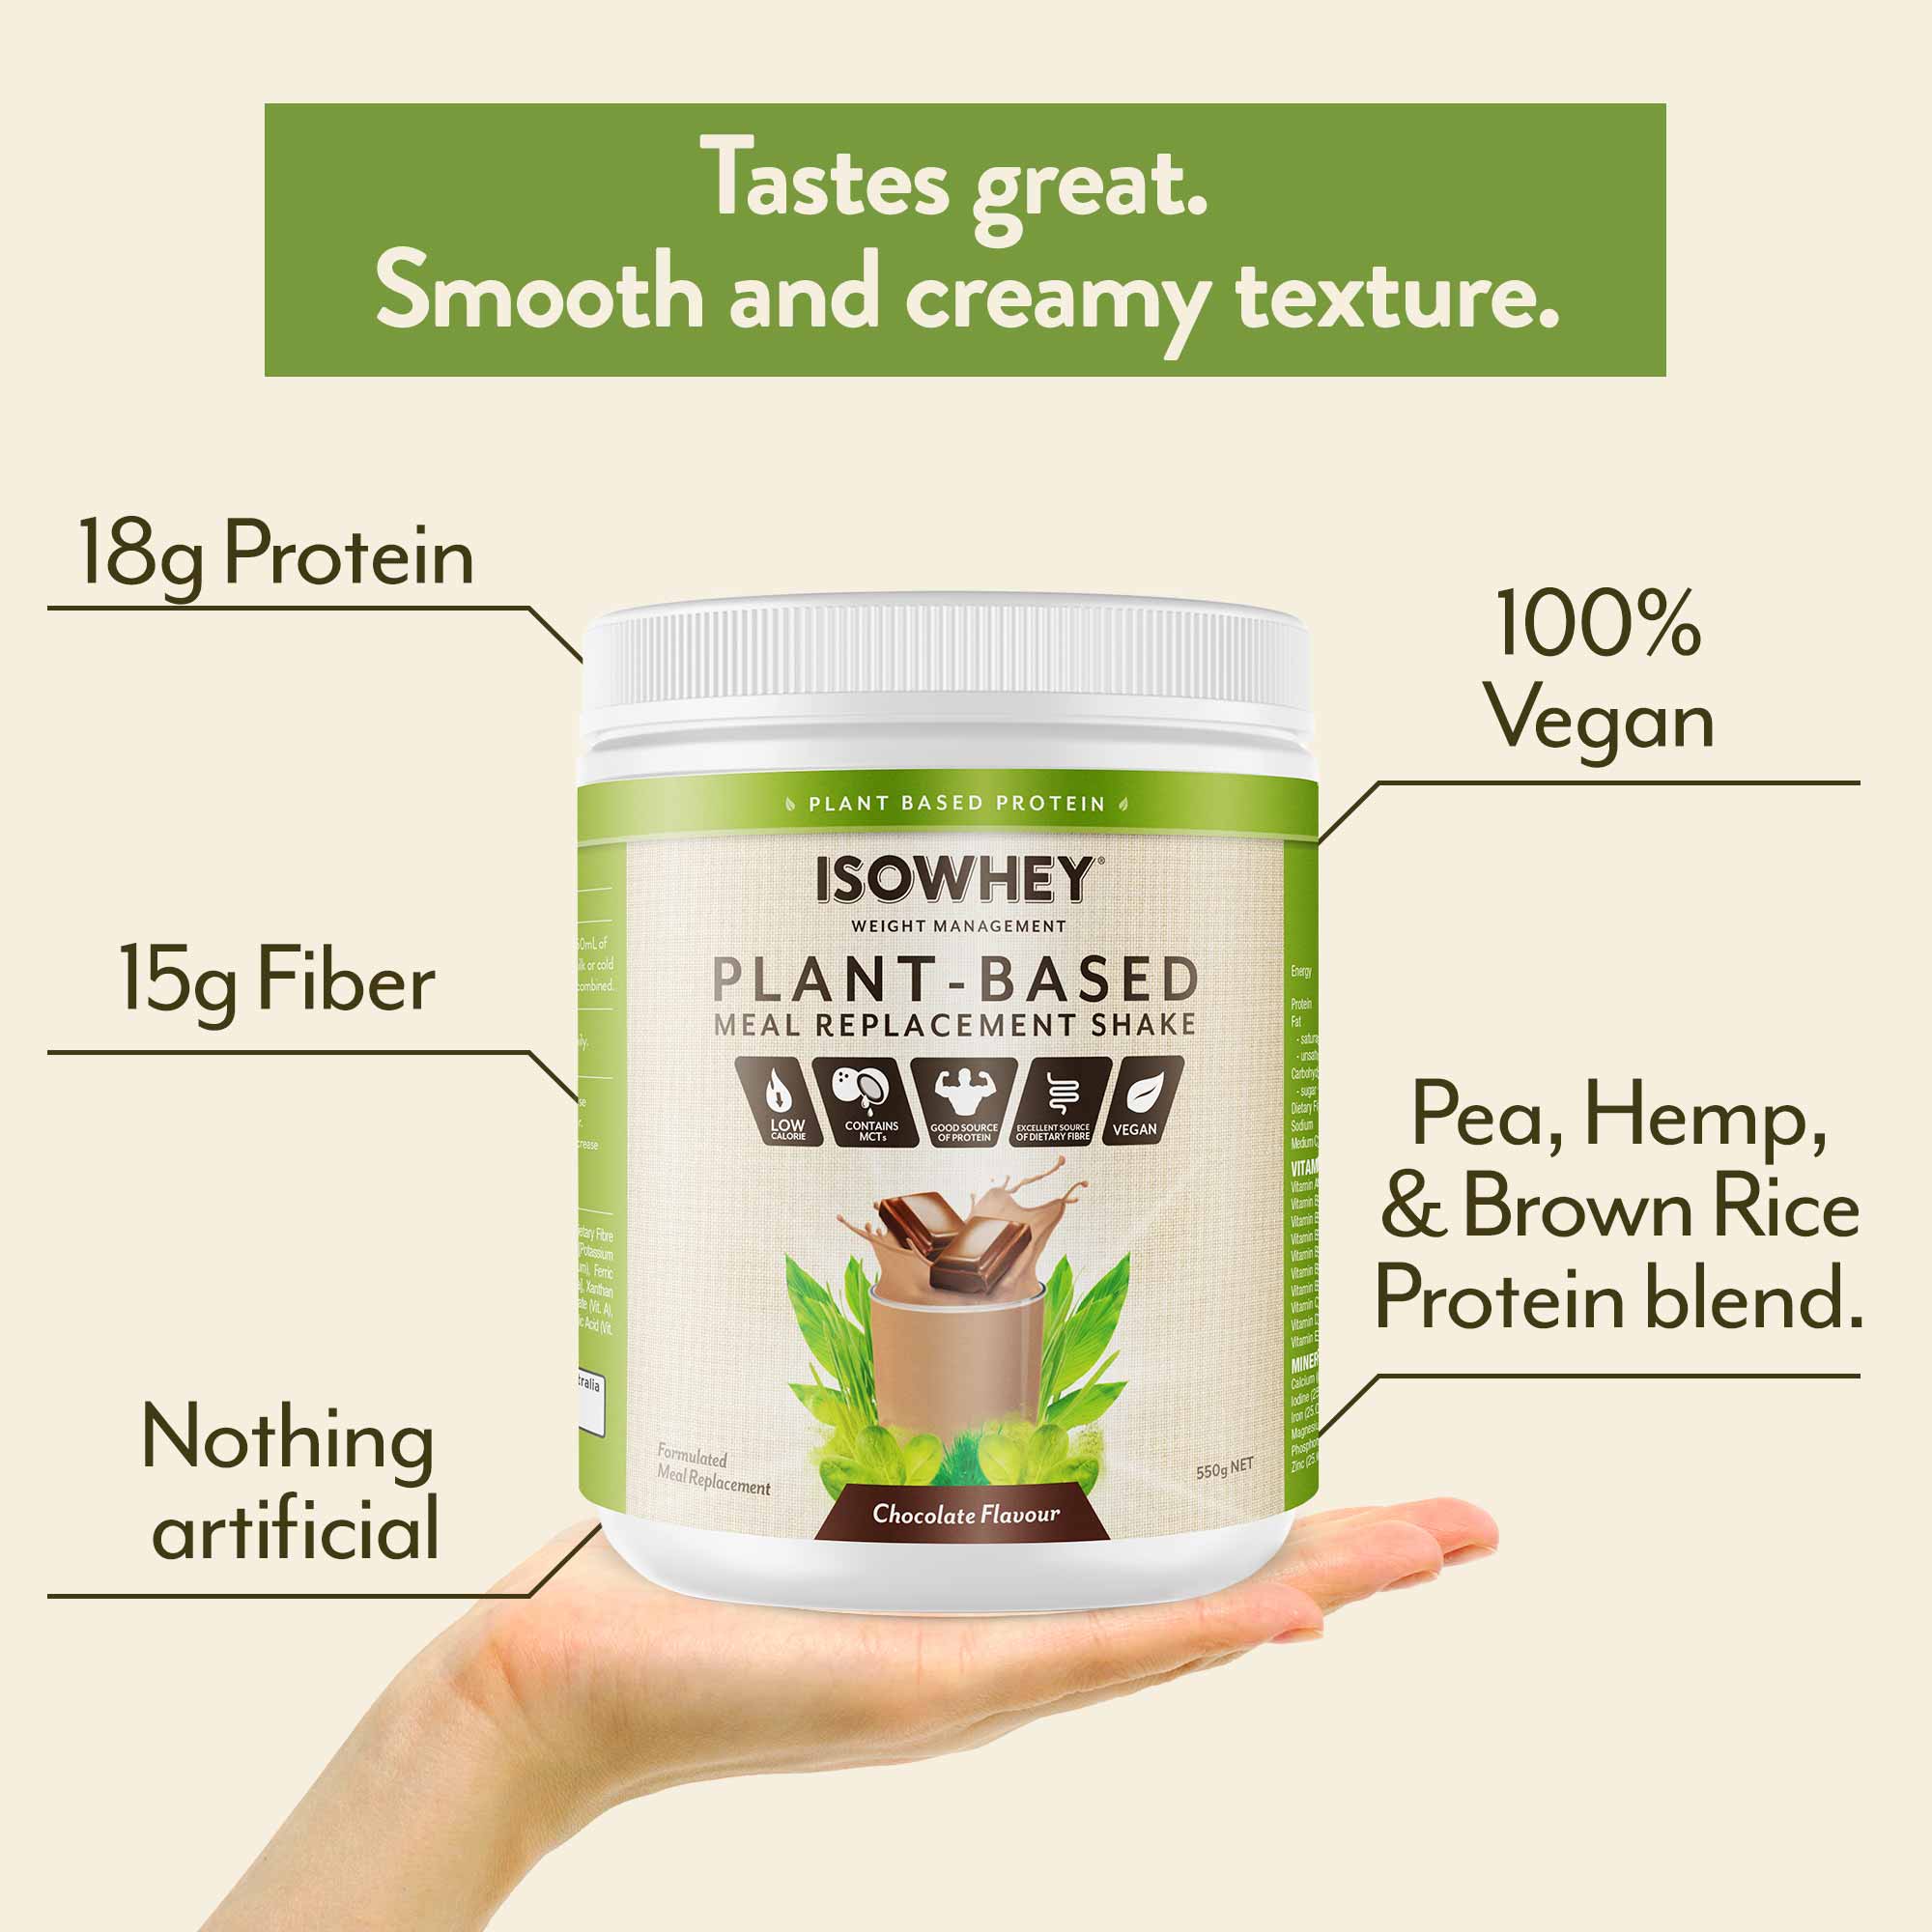 IsoWhey Plant-Based Meal Replacement Shake Chocolate 550g